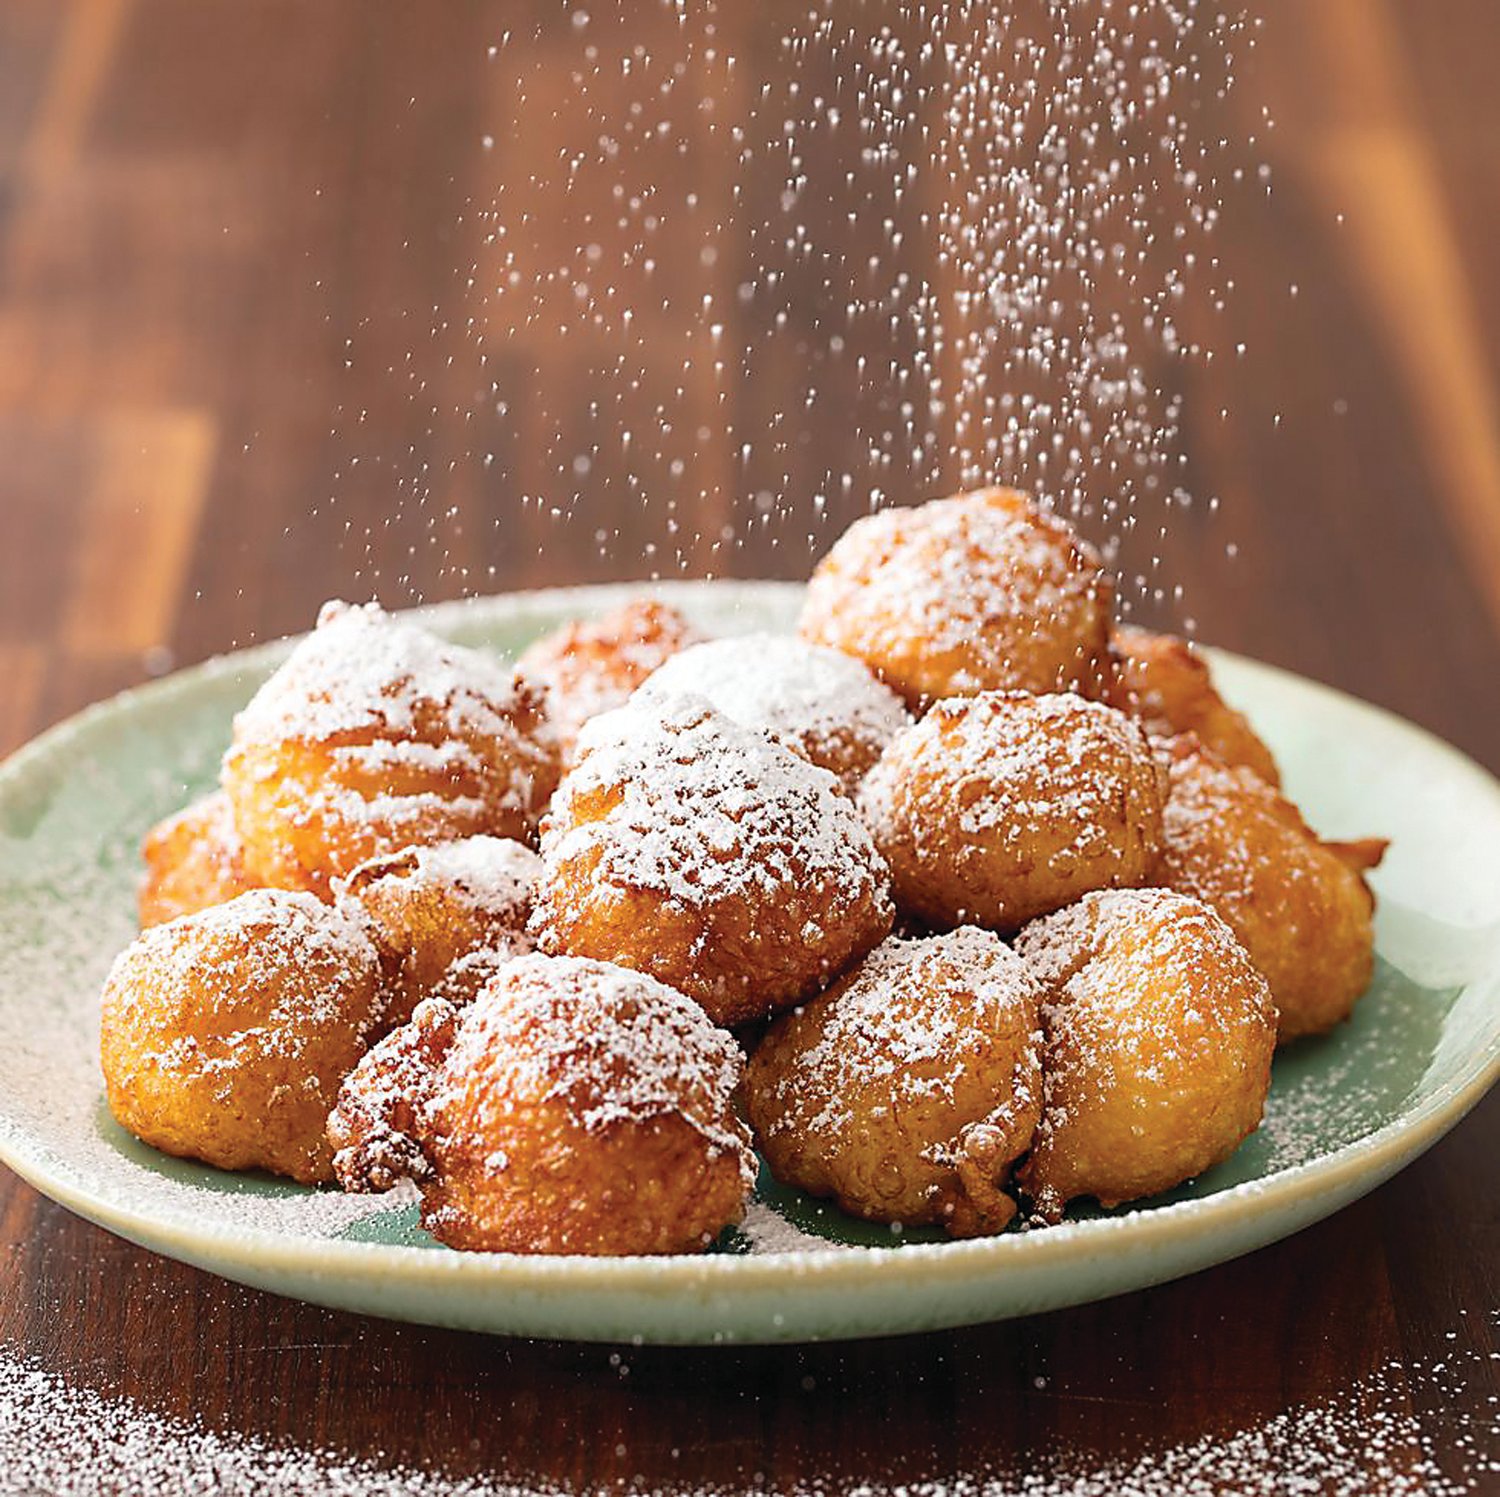 Beignets are a New Orleans tradition and would add a touch of sweetness to any Mardi Gras celebration.